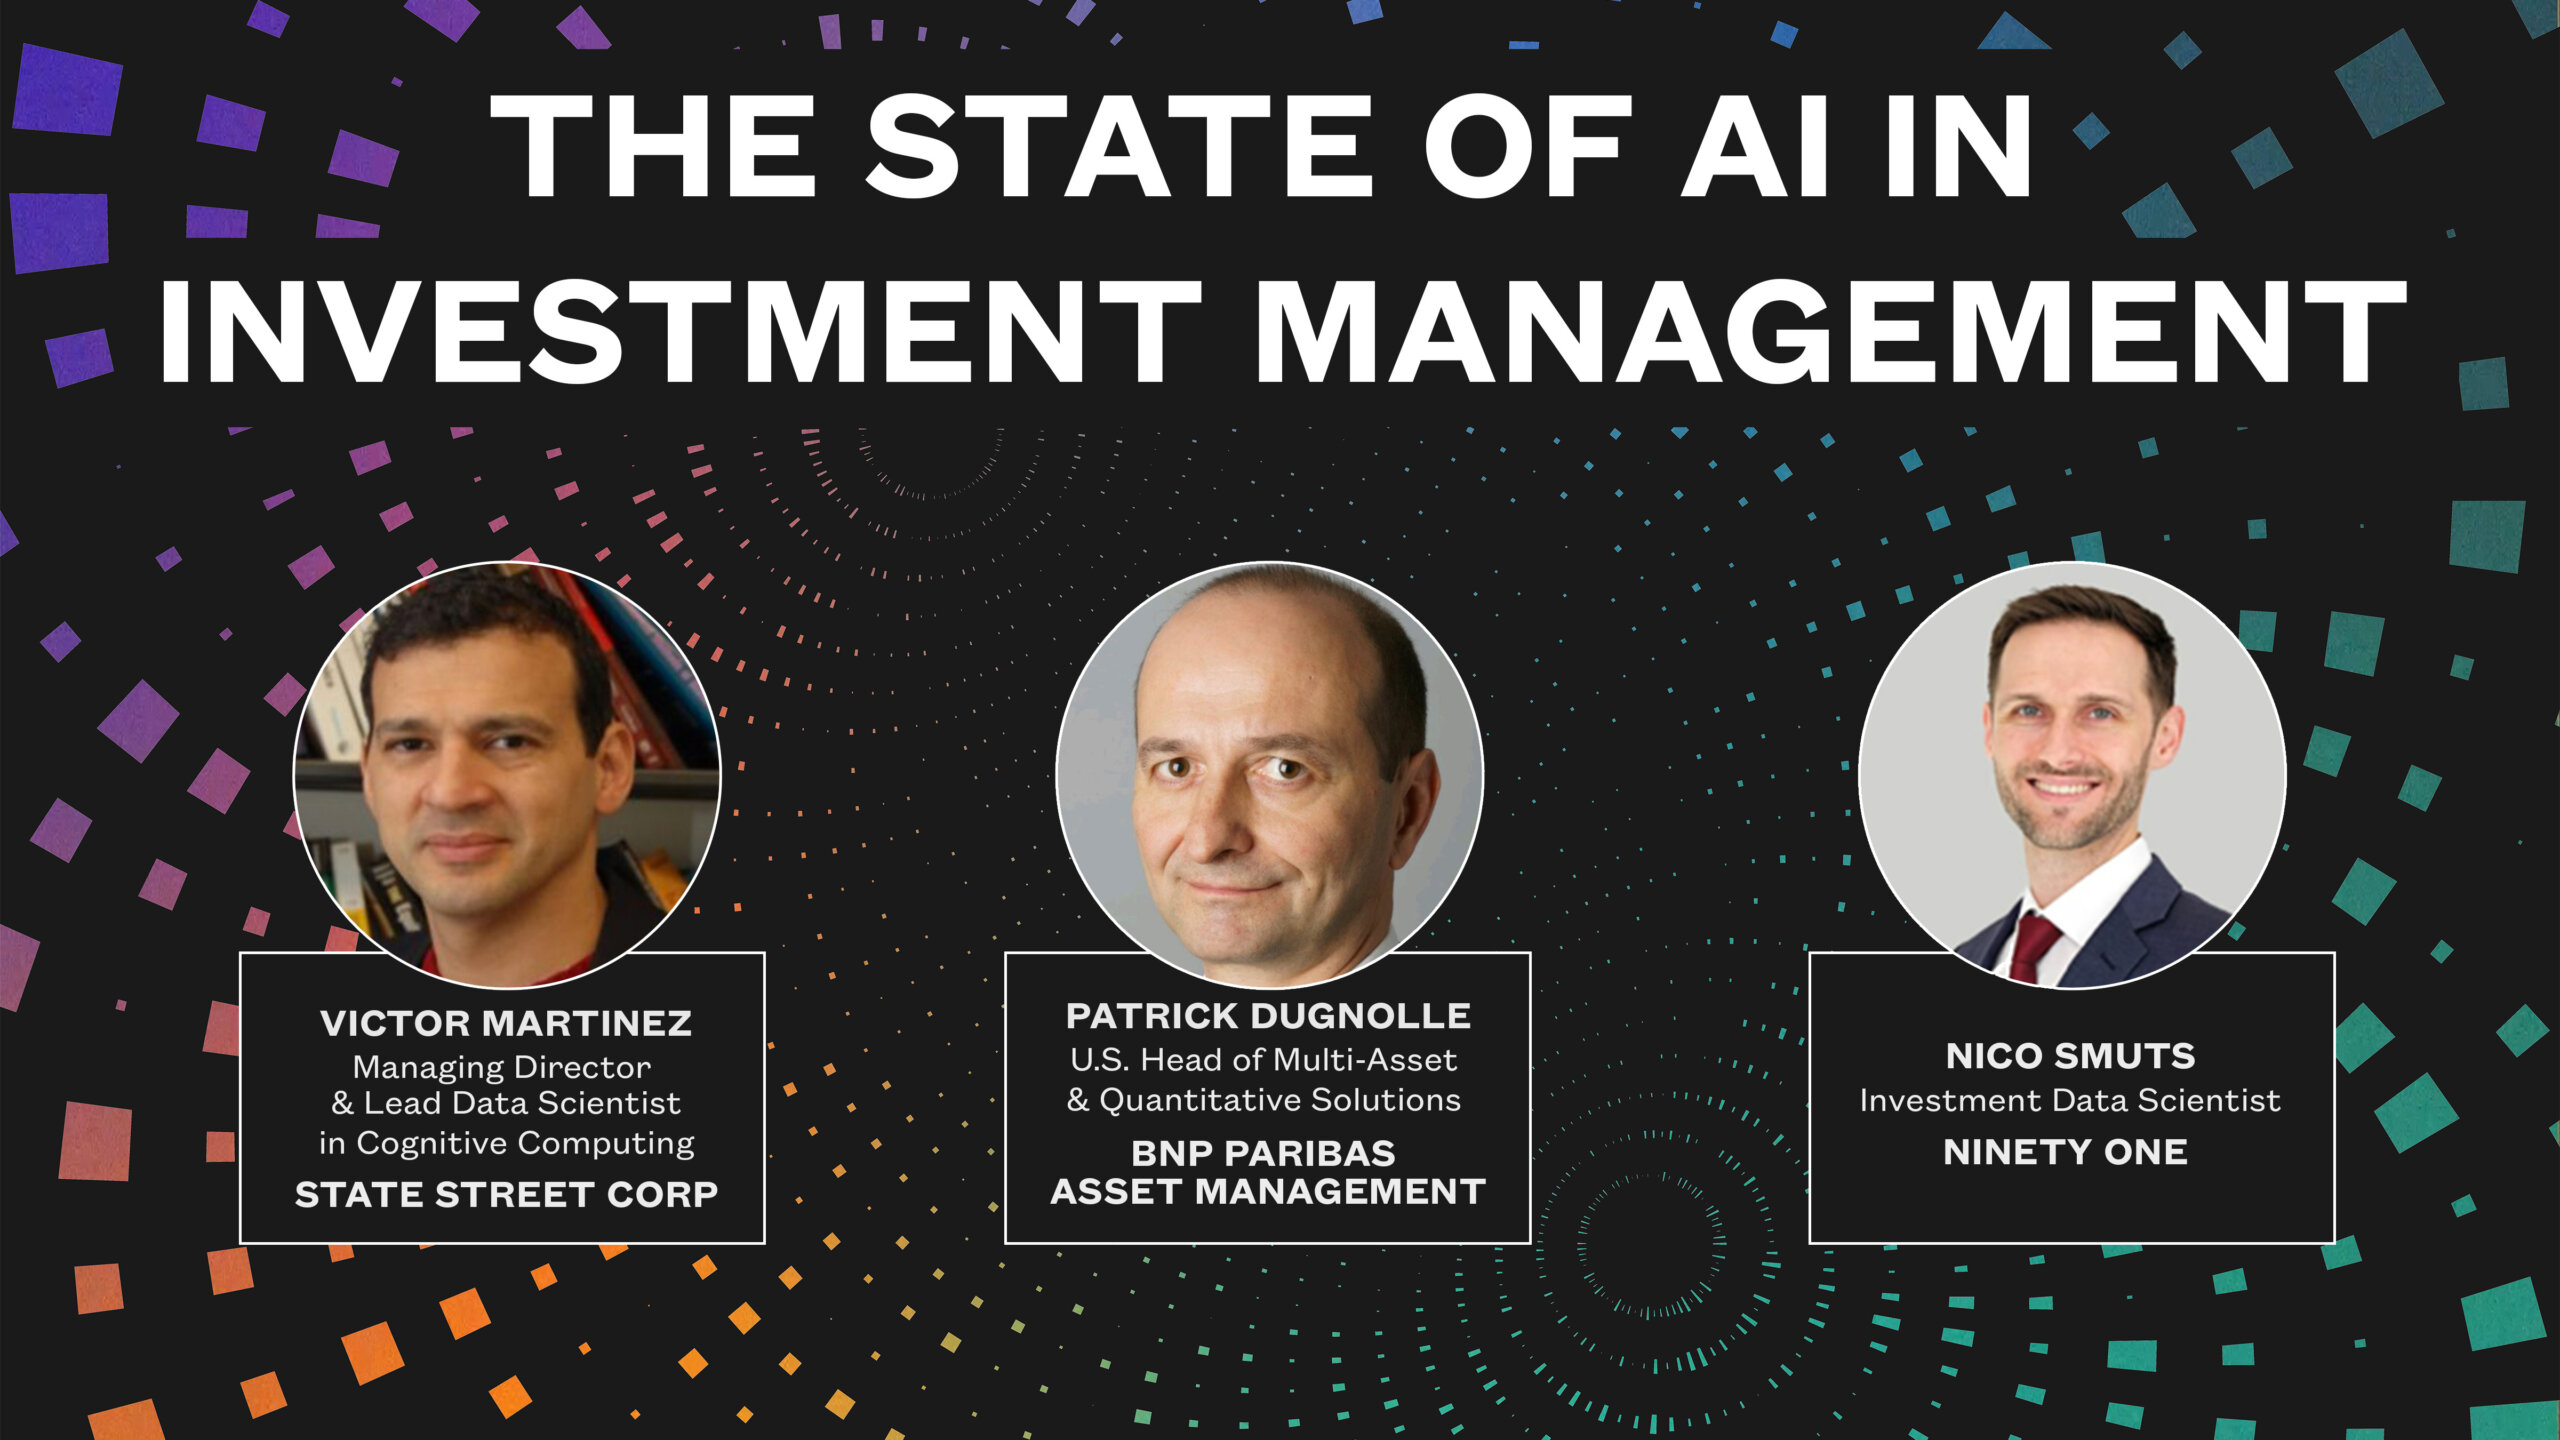 https://ai4.io/dev/blog/2020/04/22/how-covid-19-is-impacting-the-state-of-ai-in-investment-management/